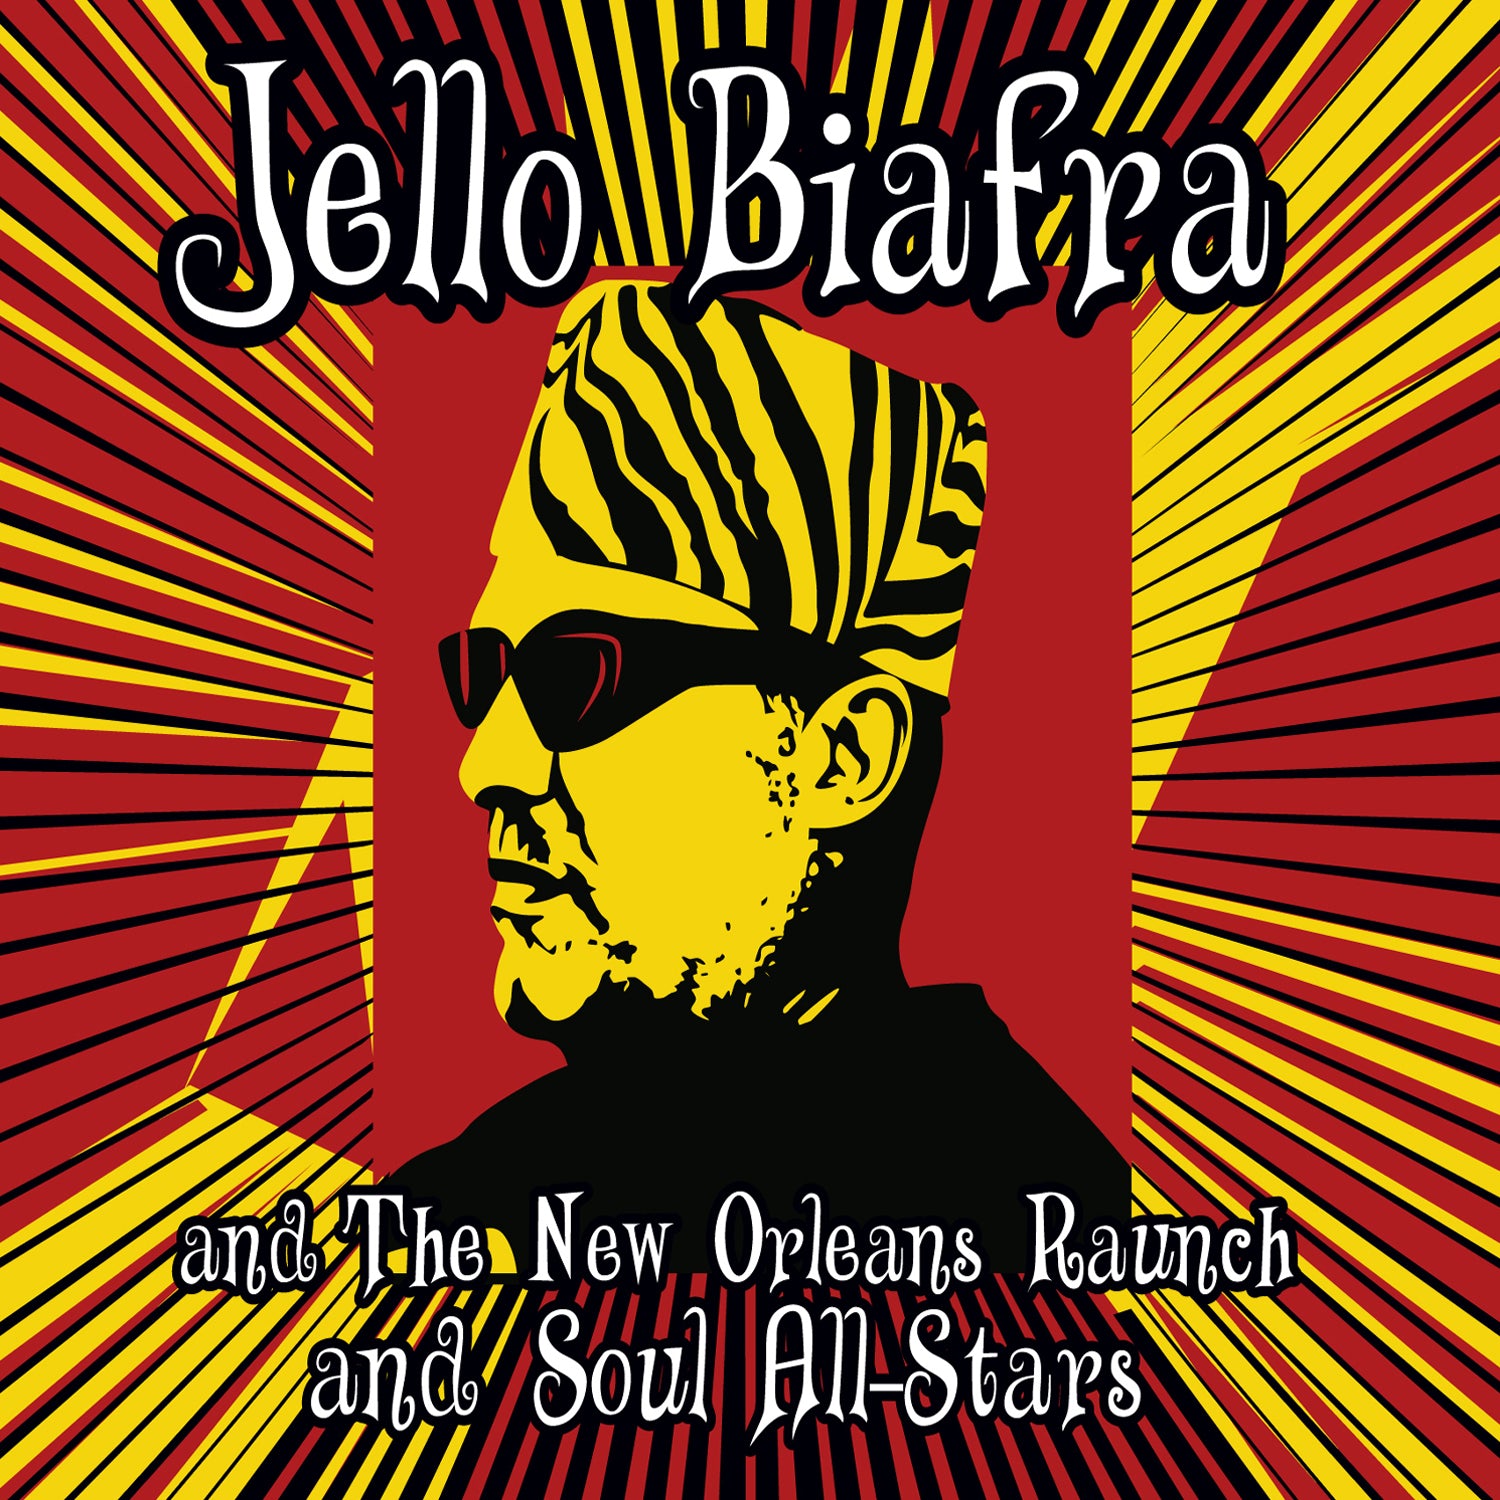 v400 - Jello Biafra And The New Orleans Raunch And Soul All-Stars - "Walk On Jindal's Splinters" - Pre-Order